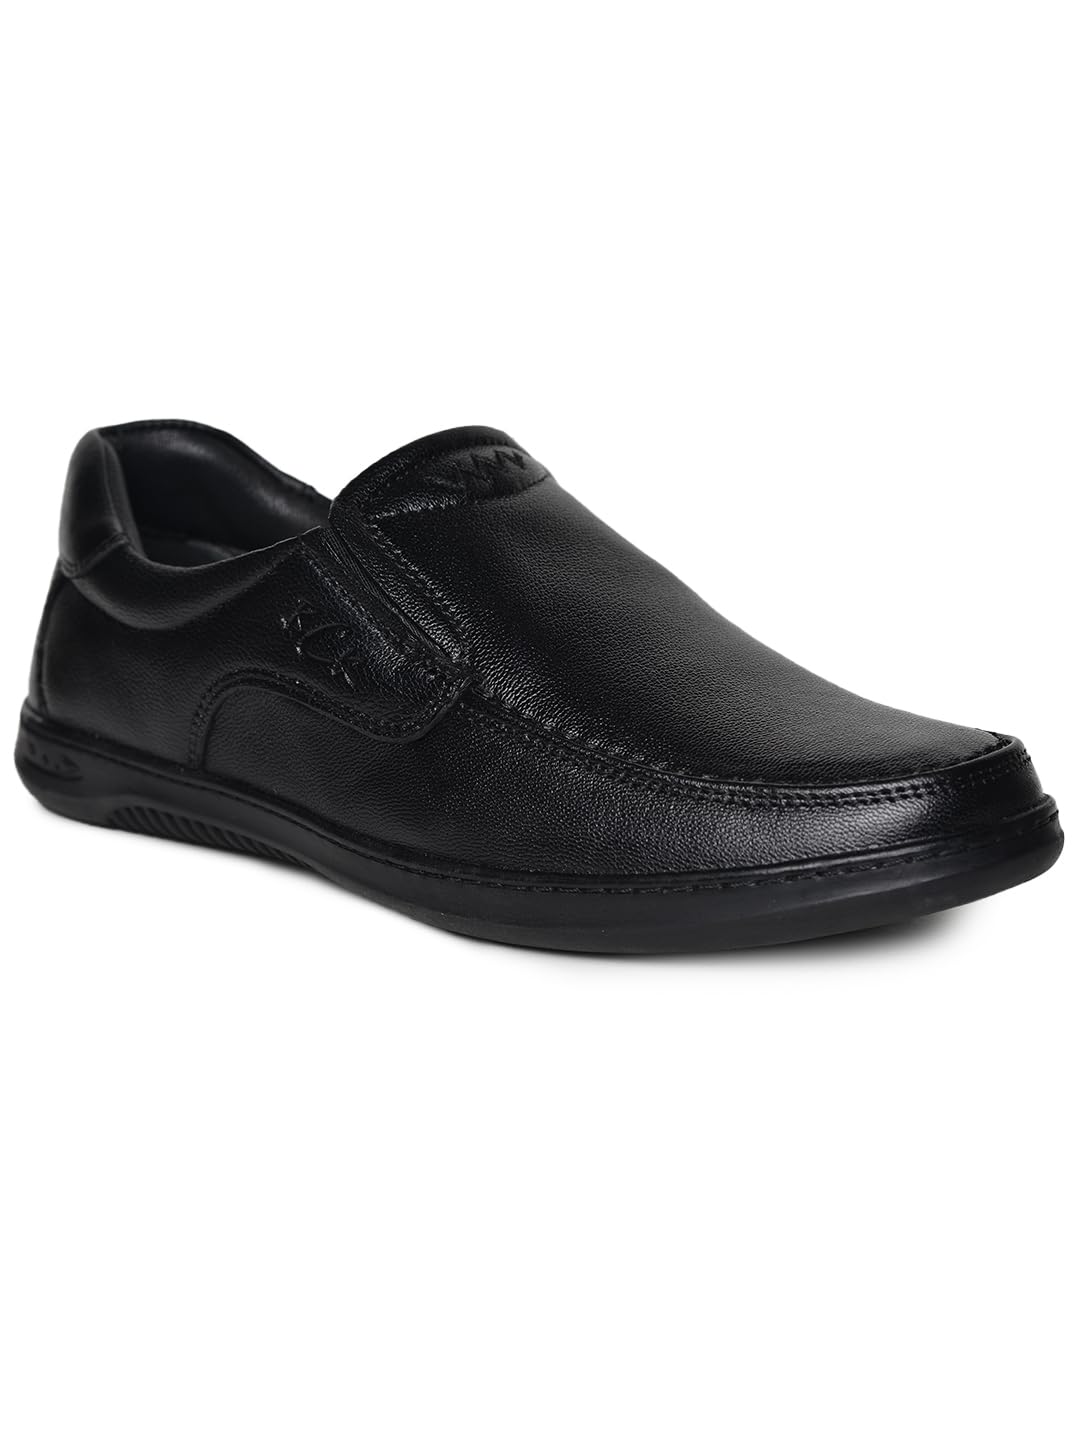 Errol Genuine Leather Casual Shoes for Mens (Black, 42) 